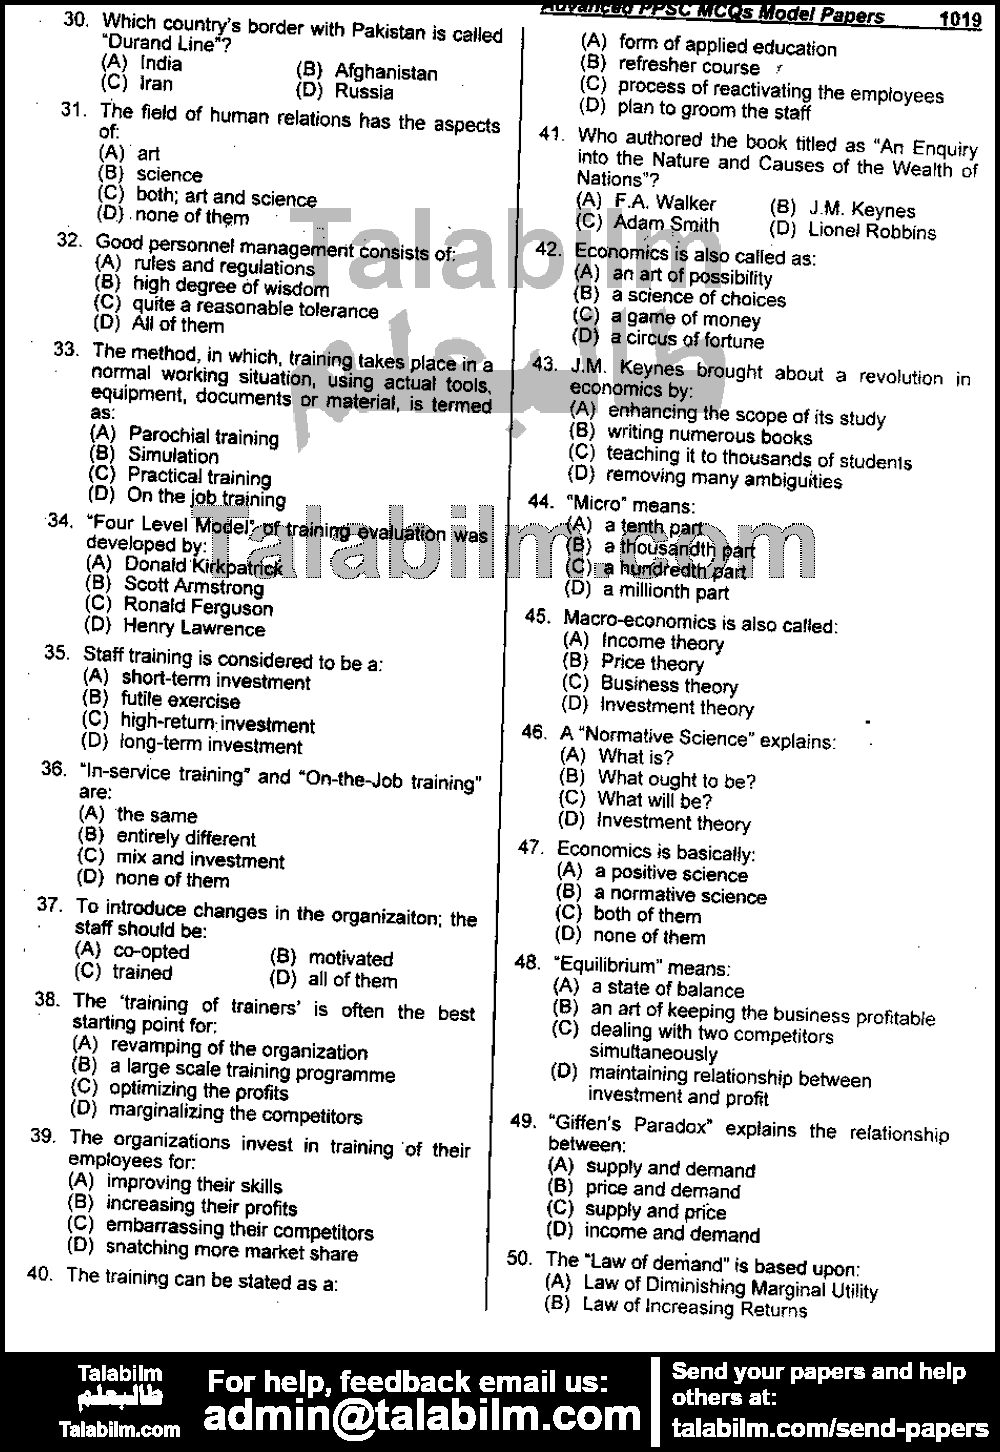 Instructor 0 past paper for 2019 Page No. 2